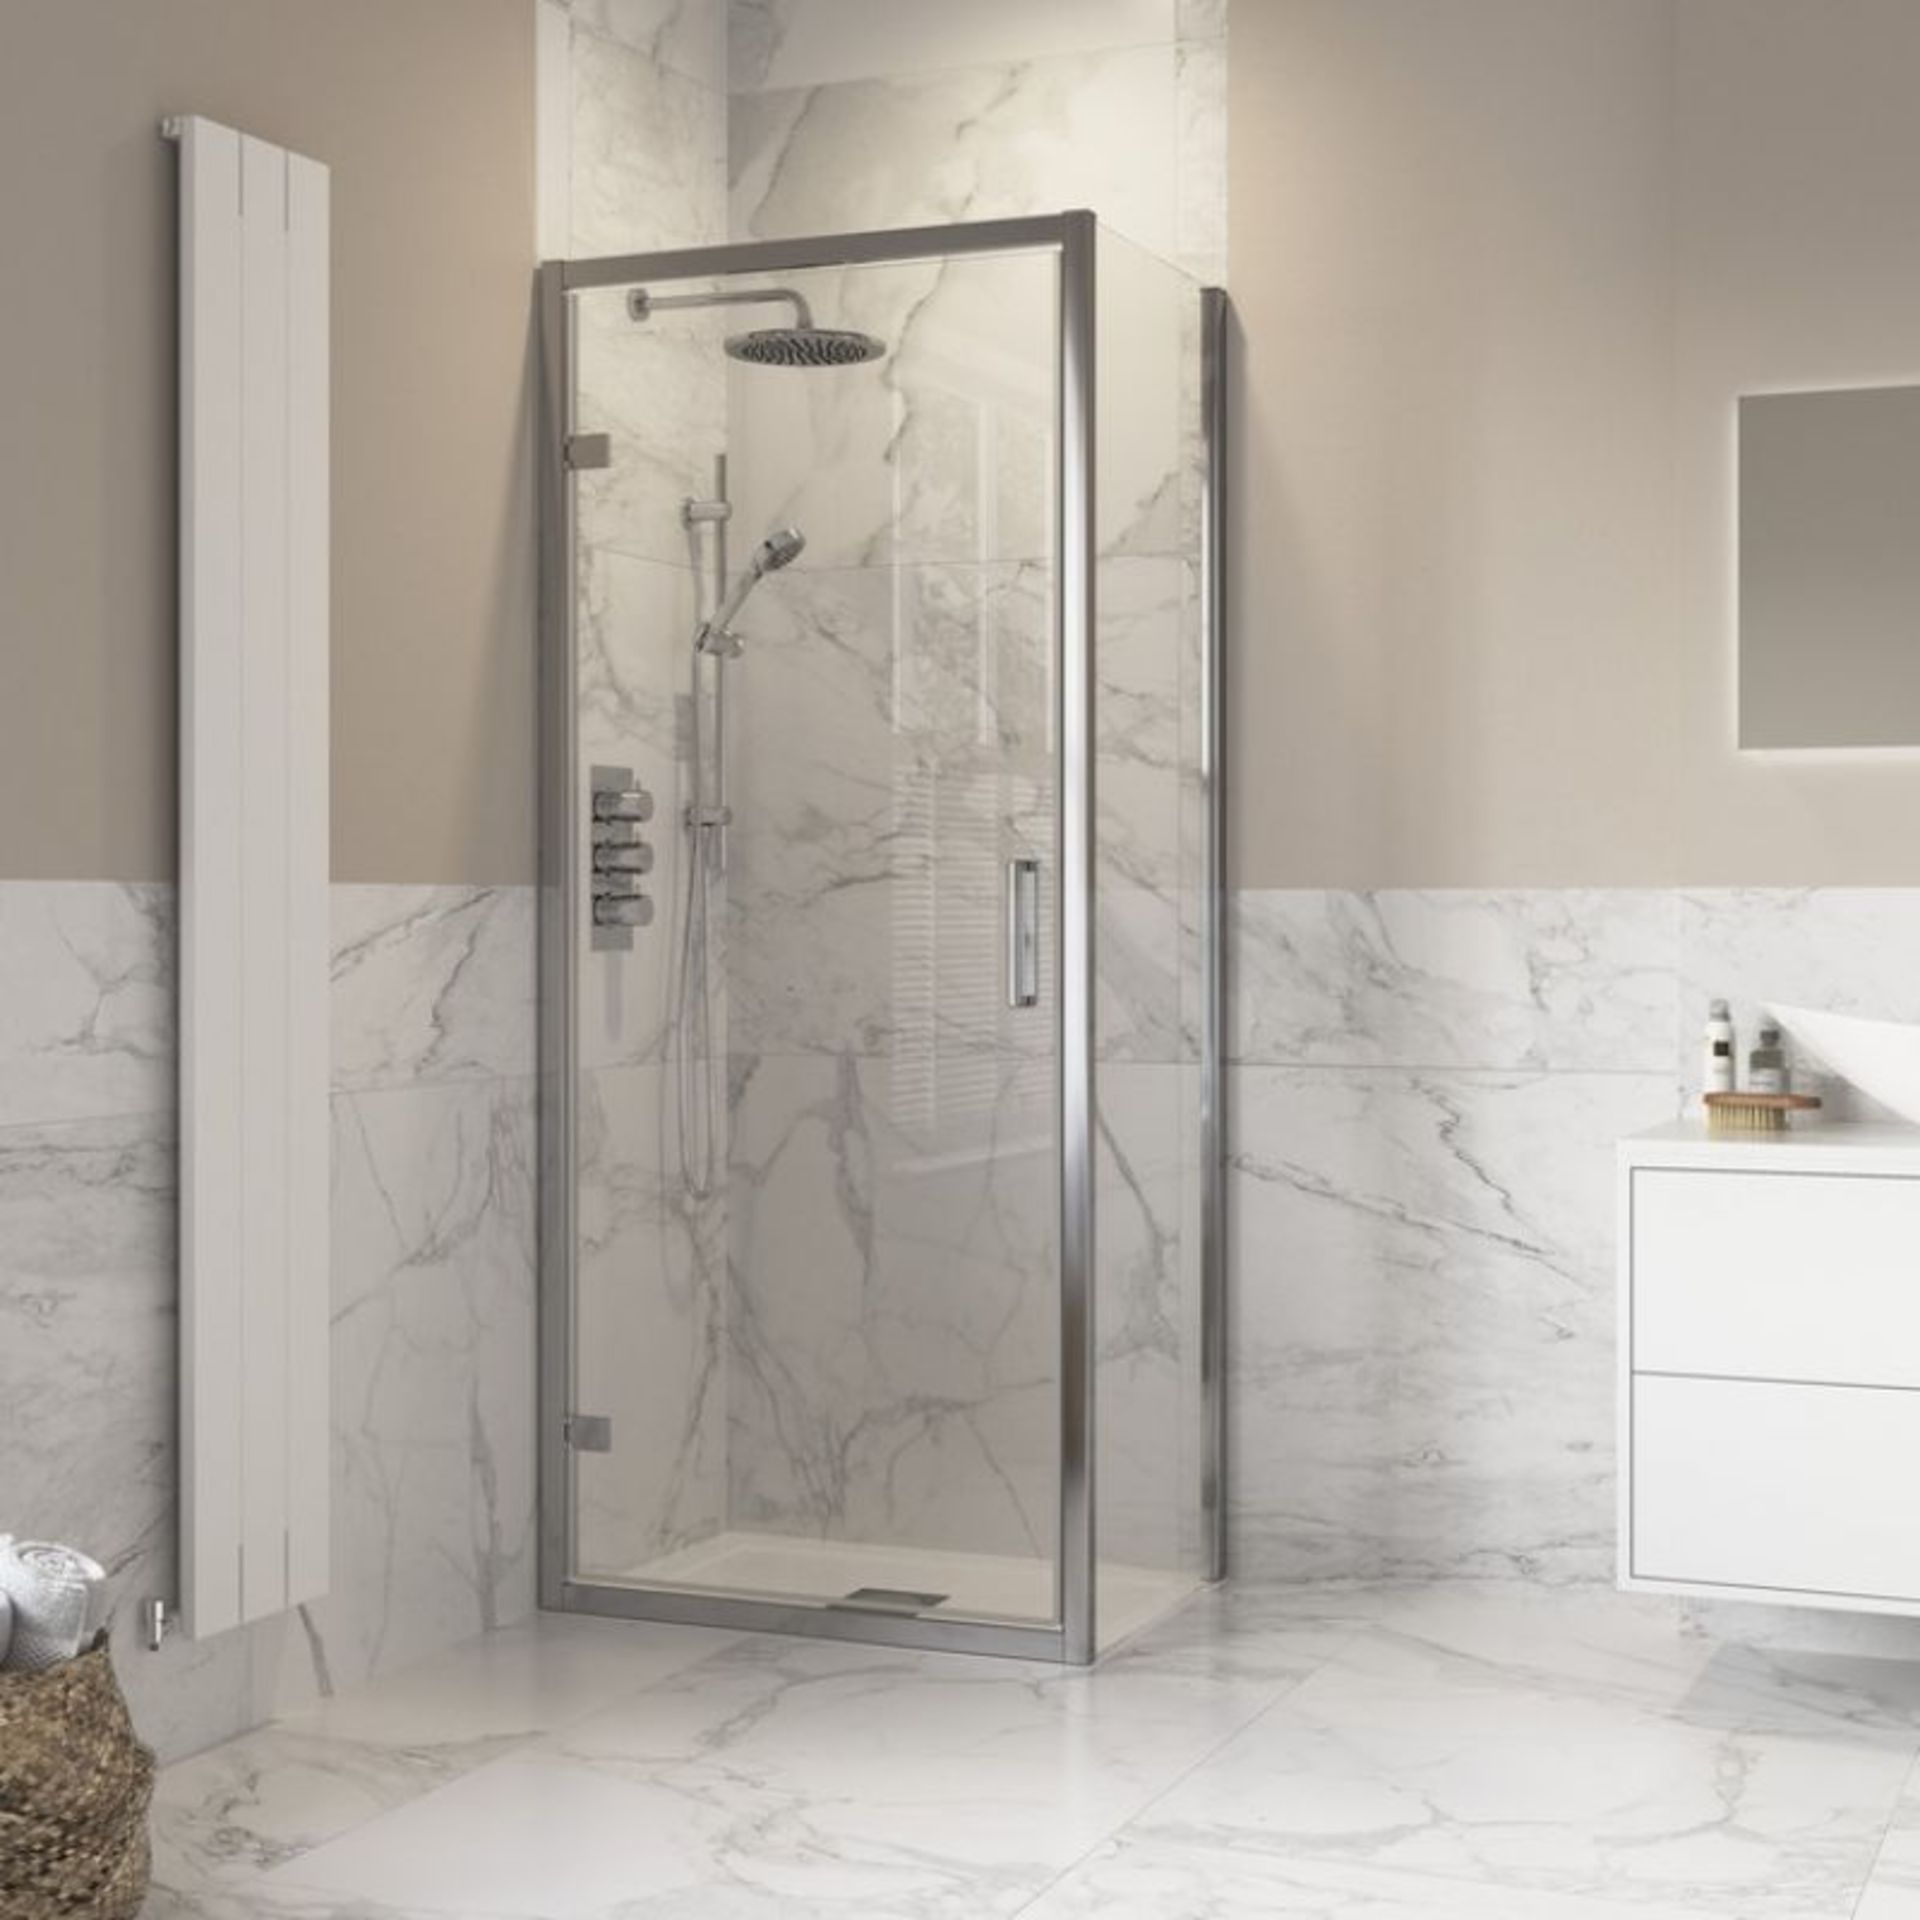 New Twyford's 700x700mm Hinged Door Shower Enclosure. Rrp £364.99. Easy Clean Glass Treatment ...